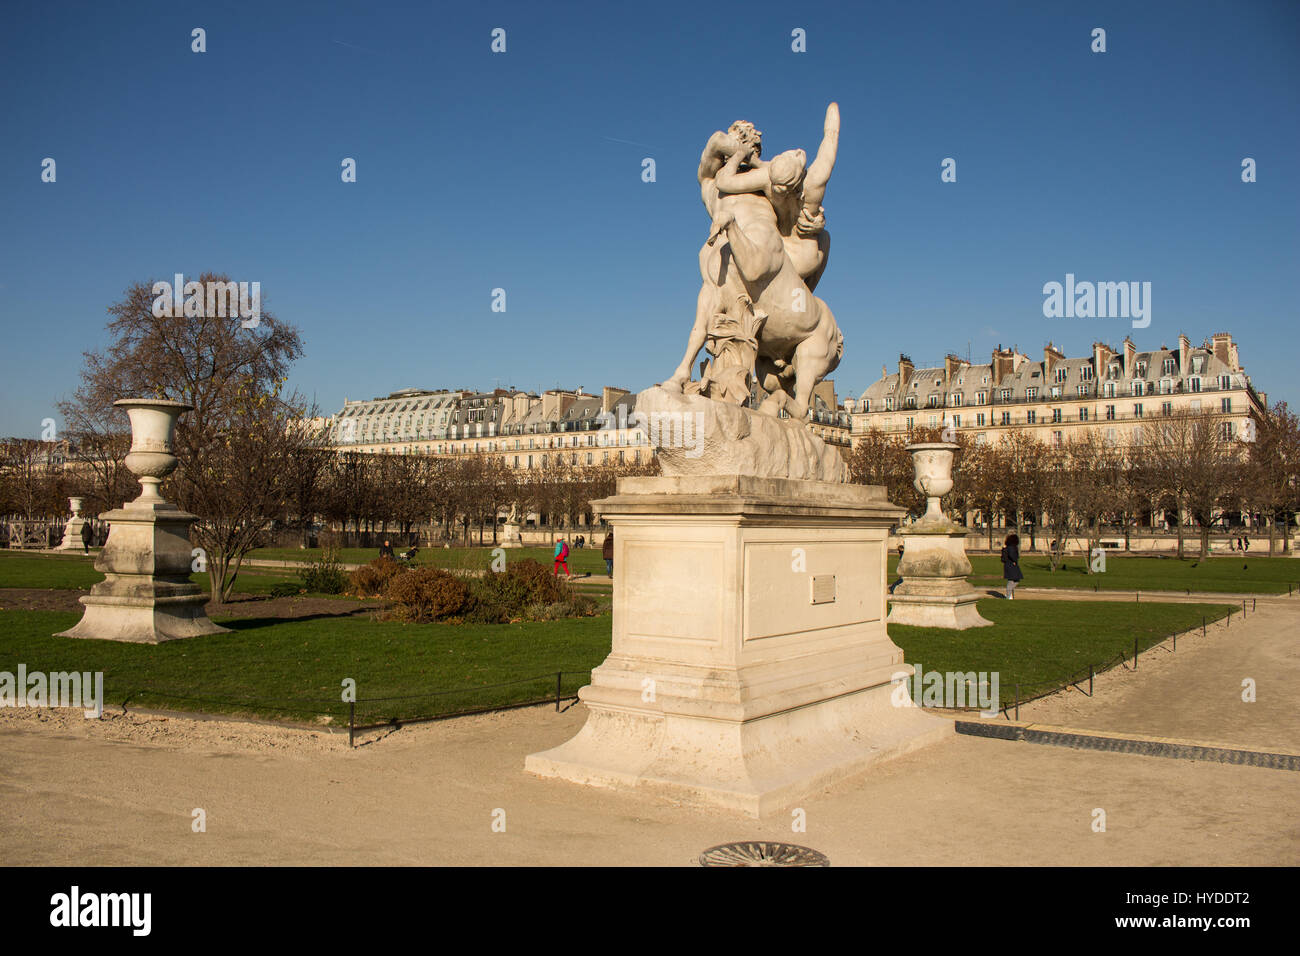 Statue on a sunny day in jardin des tuileries between musee du louvre and champs elysees, Paris France Stock Photo